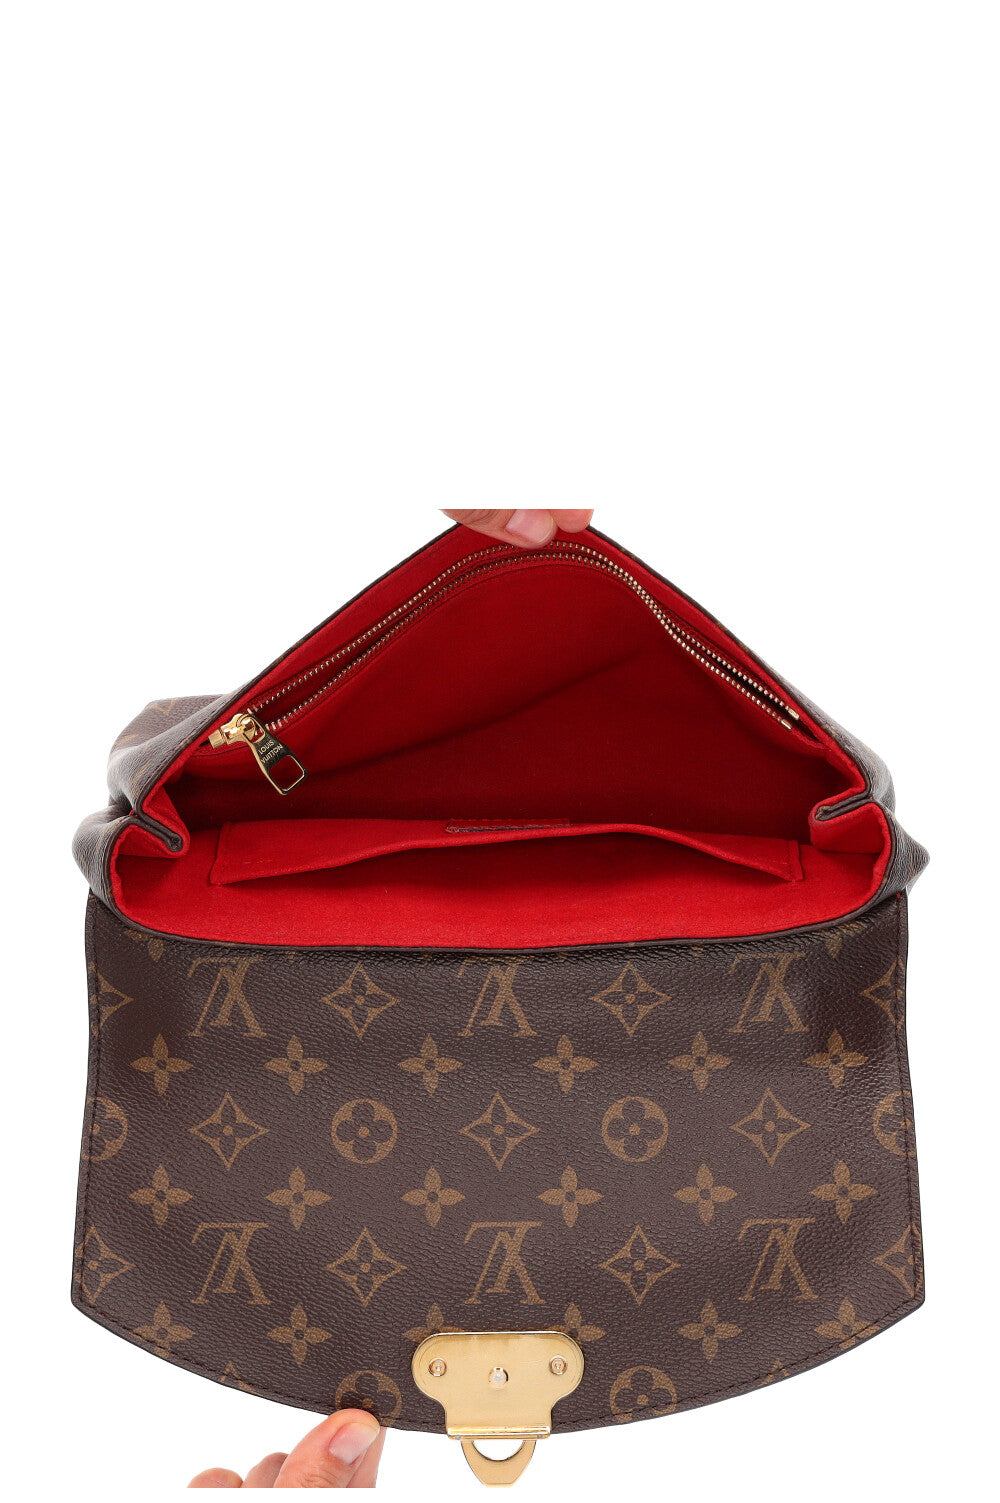 By “Virgil”  Louis Vuitton & (RED)